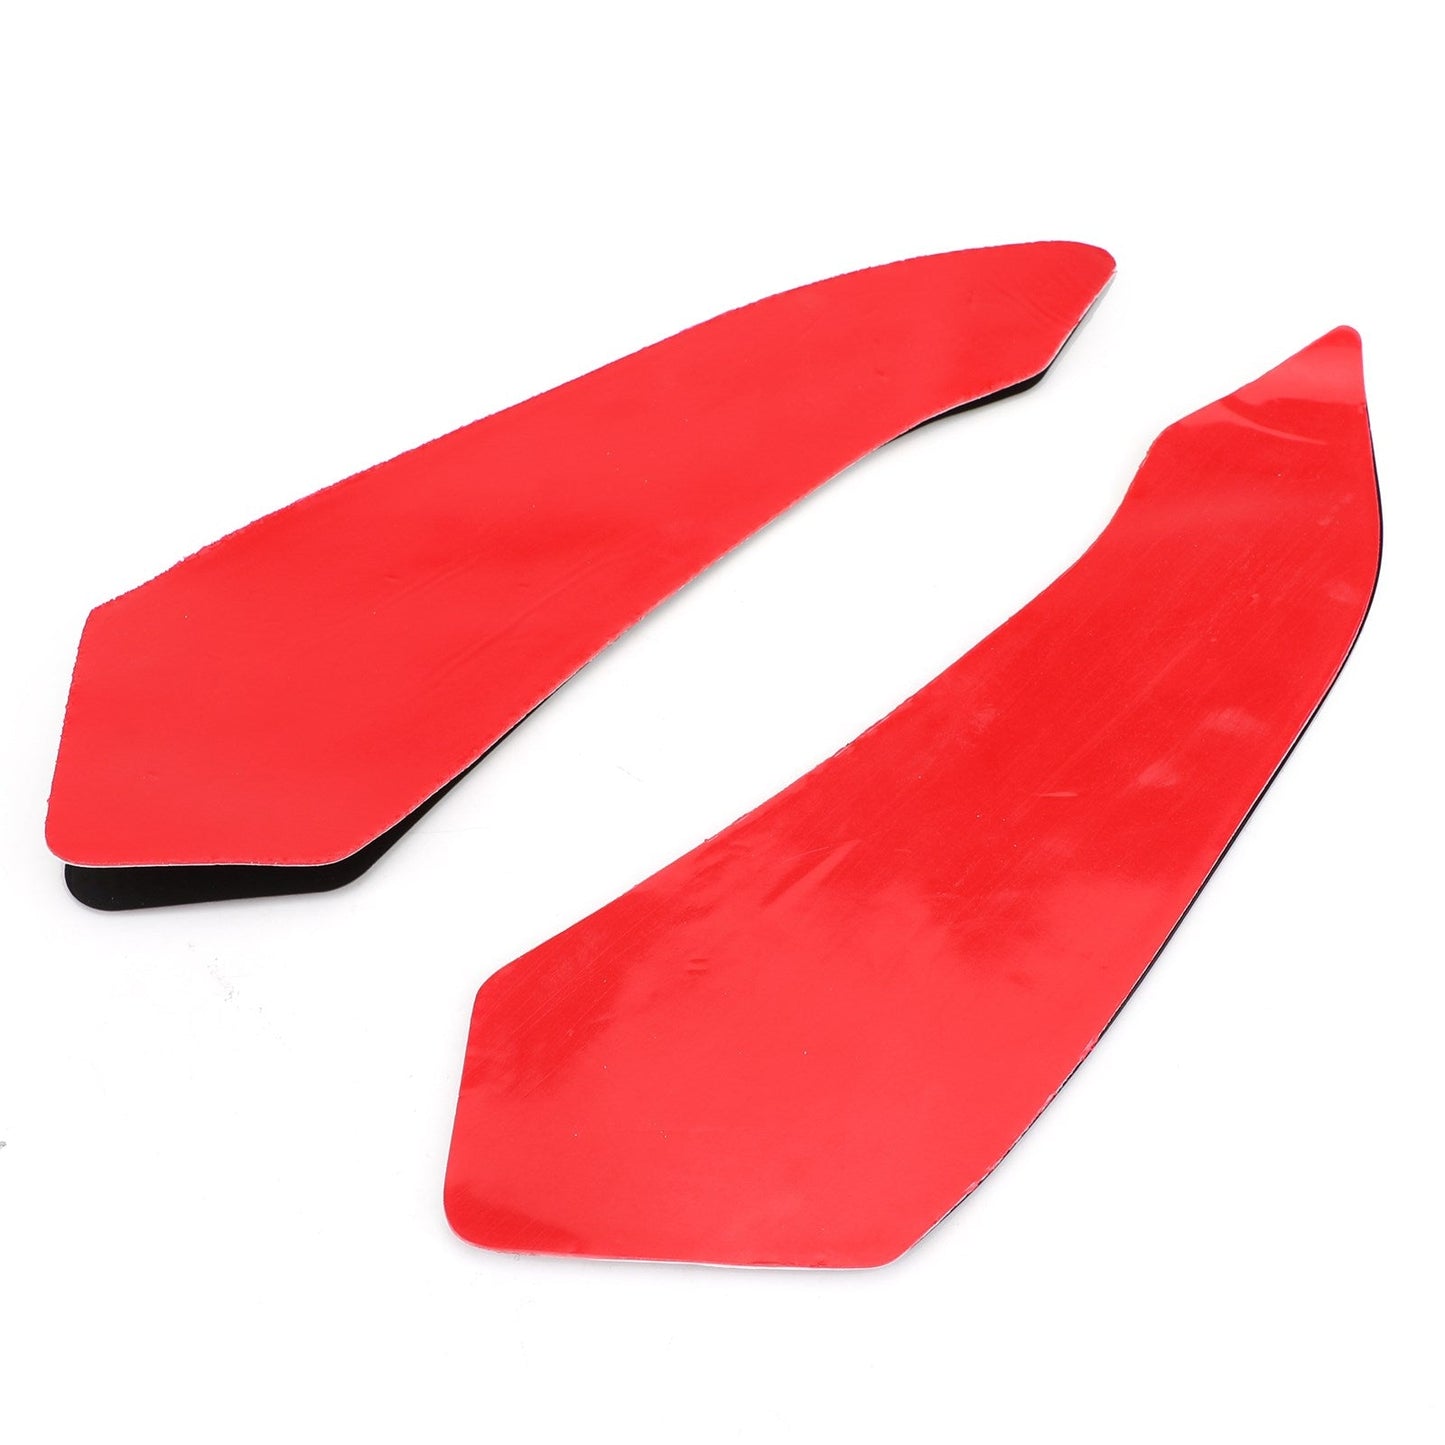 2X Side Tank Traction Grips Pads Fit For Multistrada Enduro 1200 16-18 Rubber